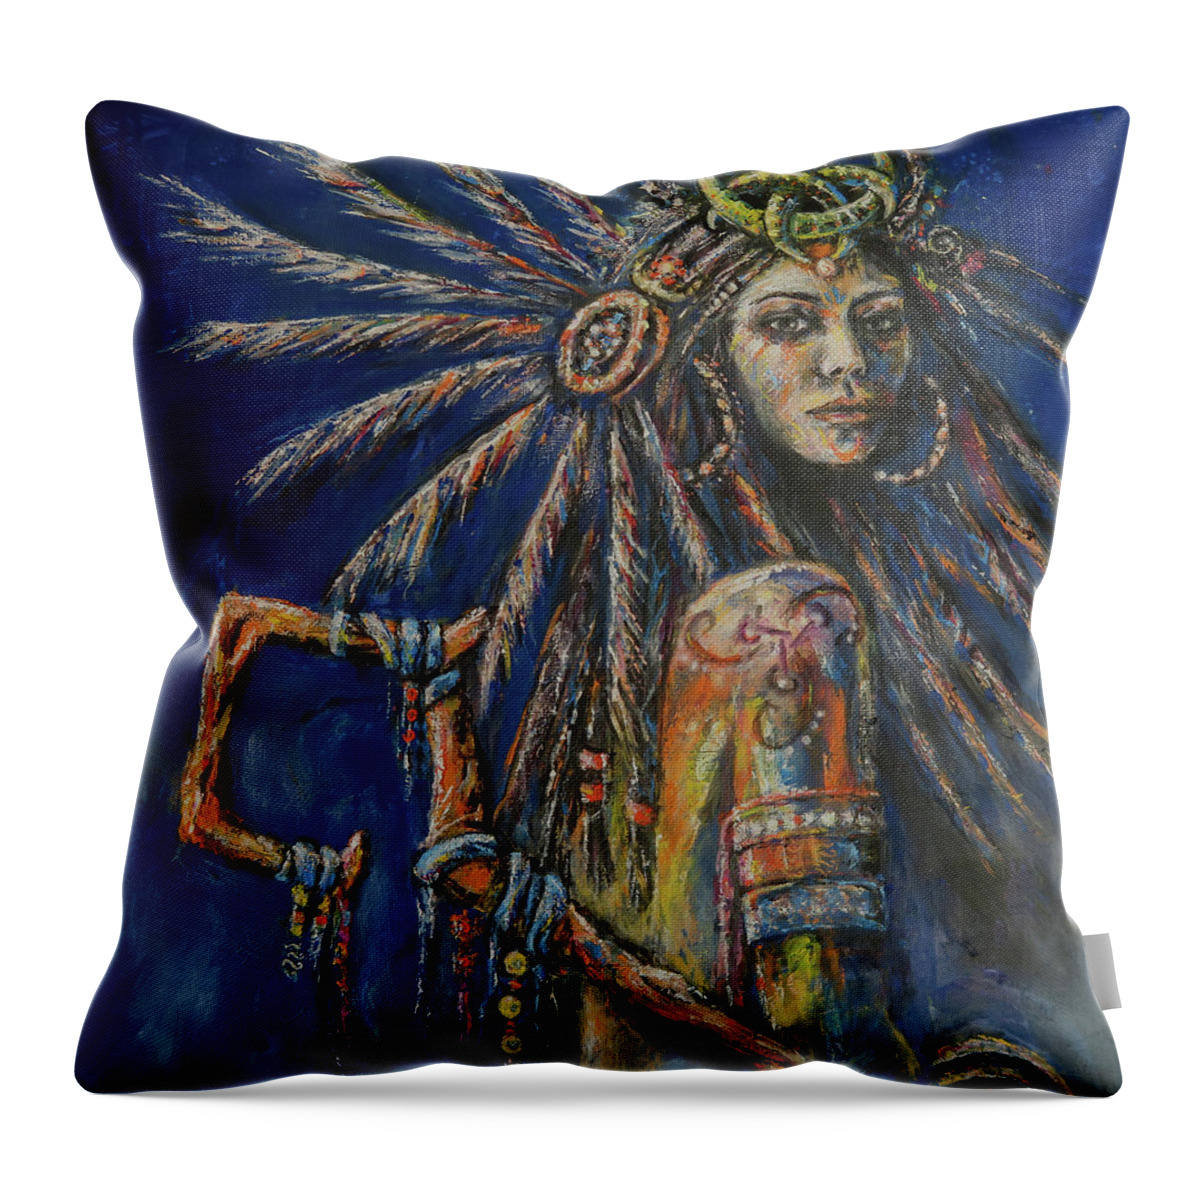 Zoe Oakley Throw Pillow featuring the painting Warrior Priestess by Zoe Oakley